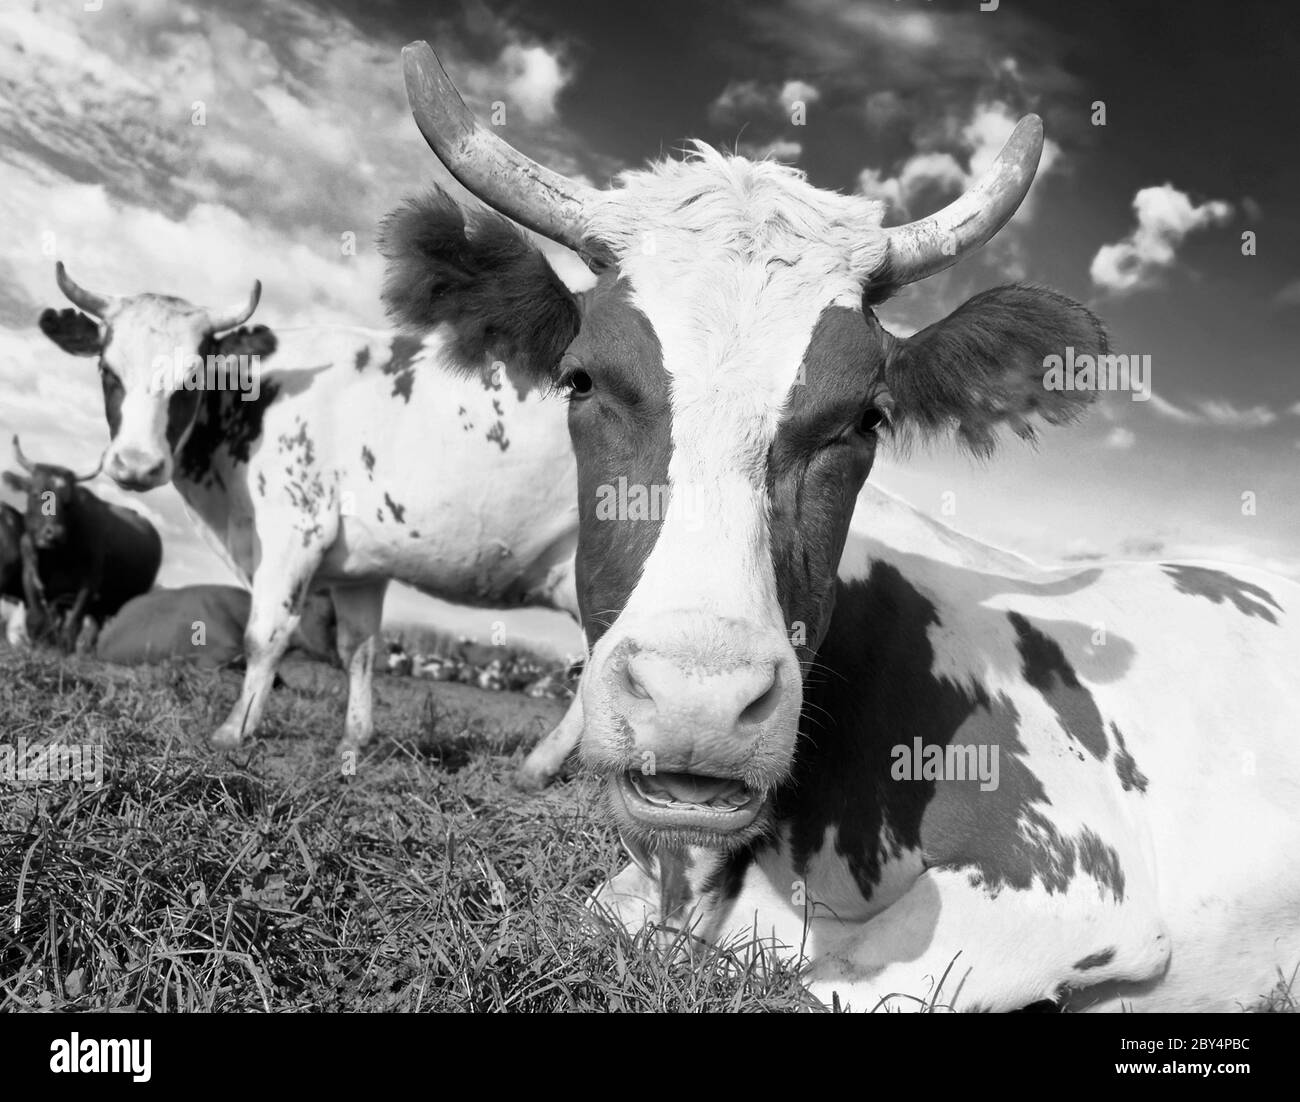 Close up of a dairy cow in a field Stock Photo